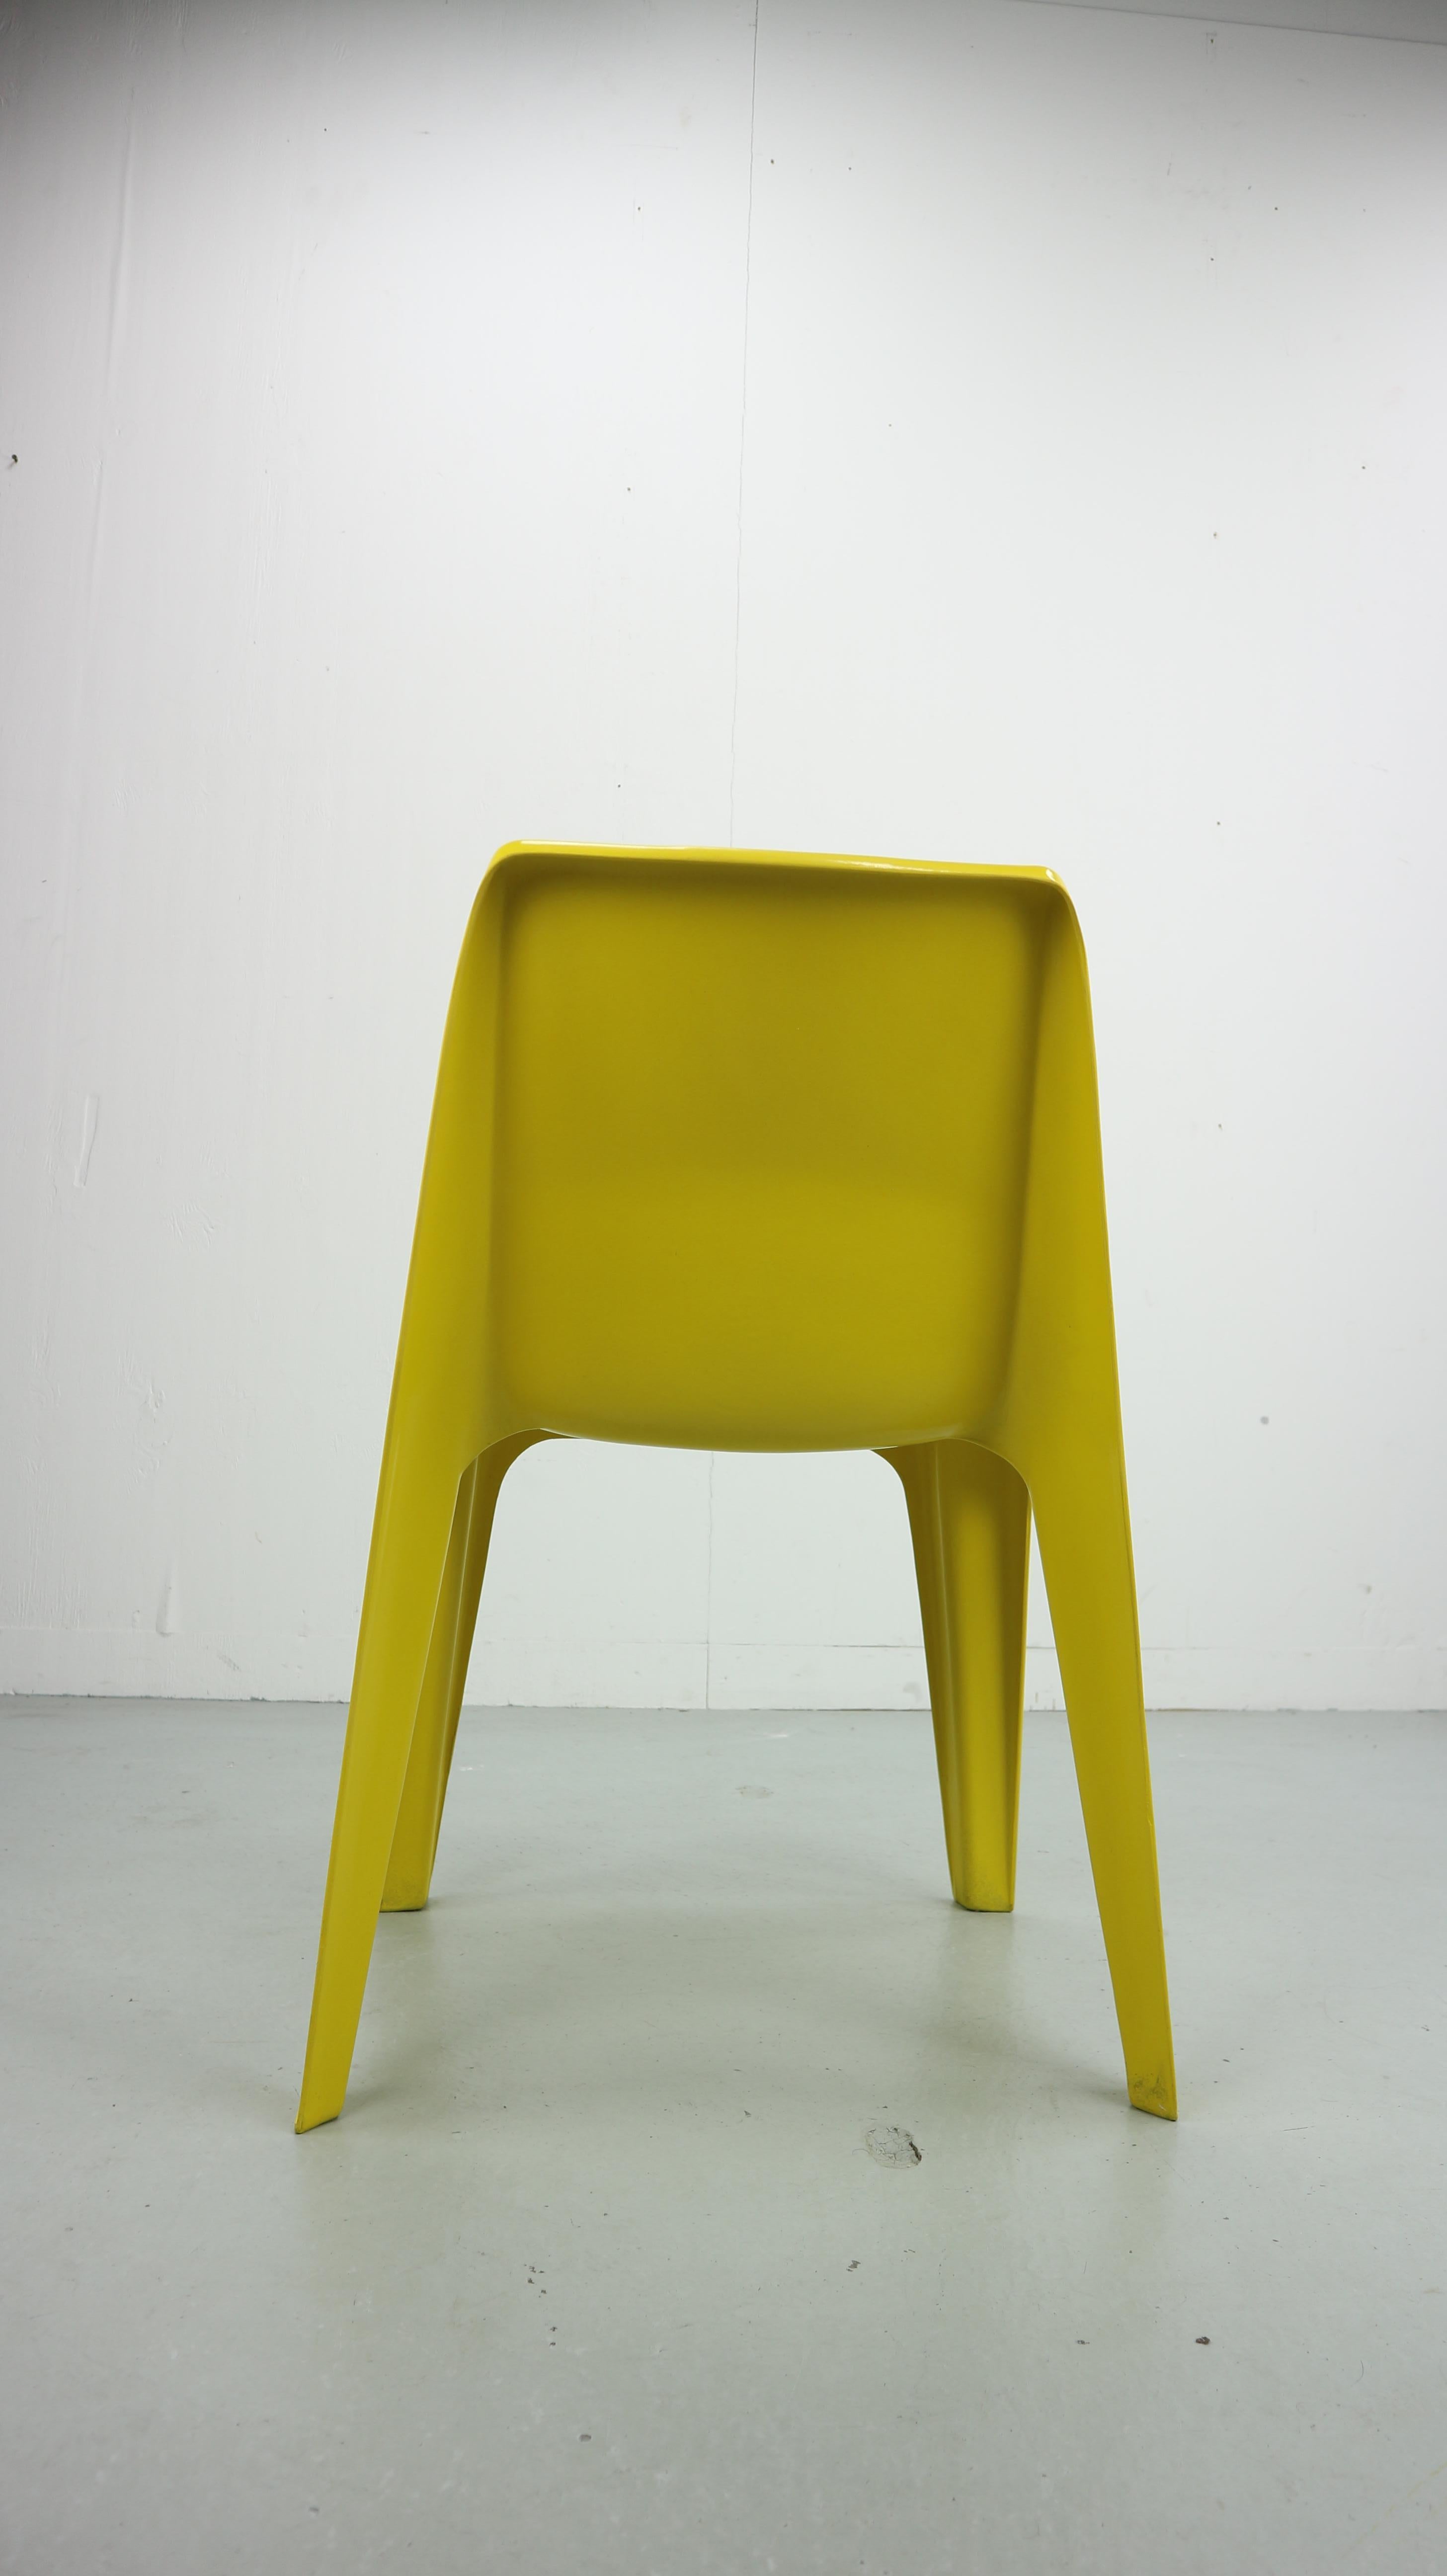 Mid-20th Century Model BA 1171 4 Chair by Helmut Bätzner For Bofinger, 1960s, Germany